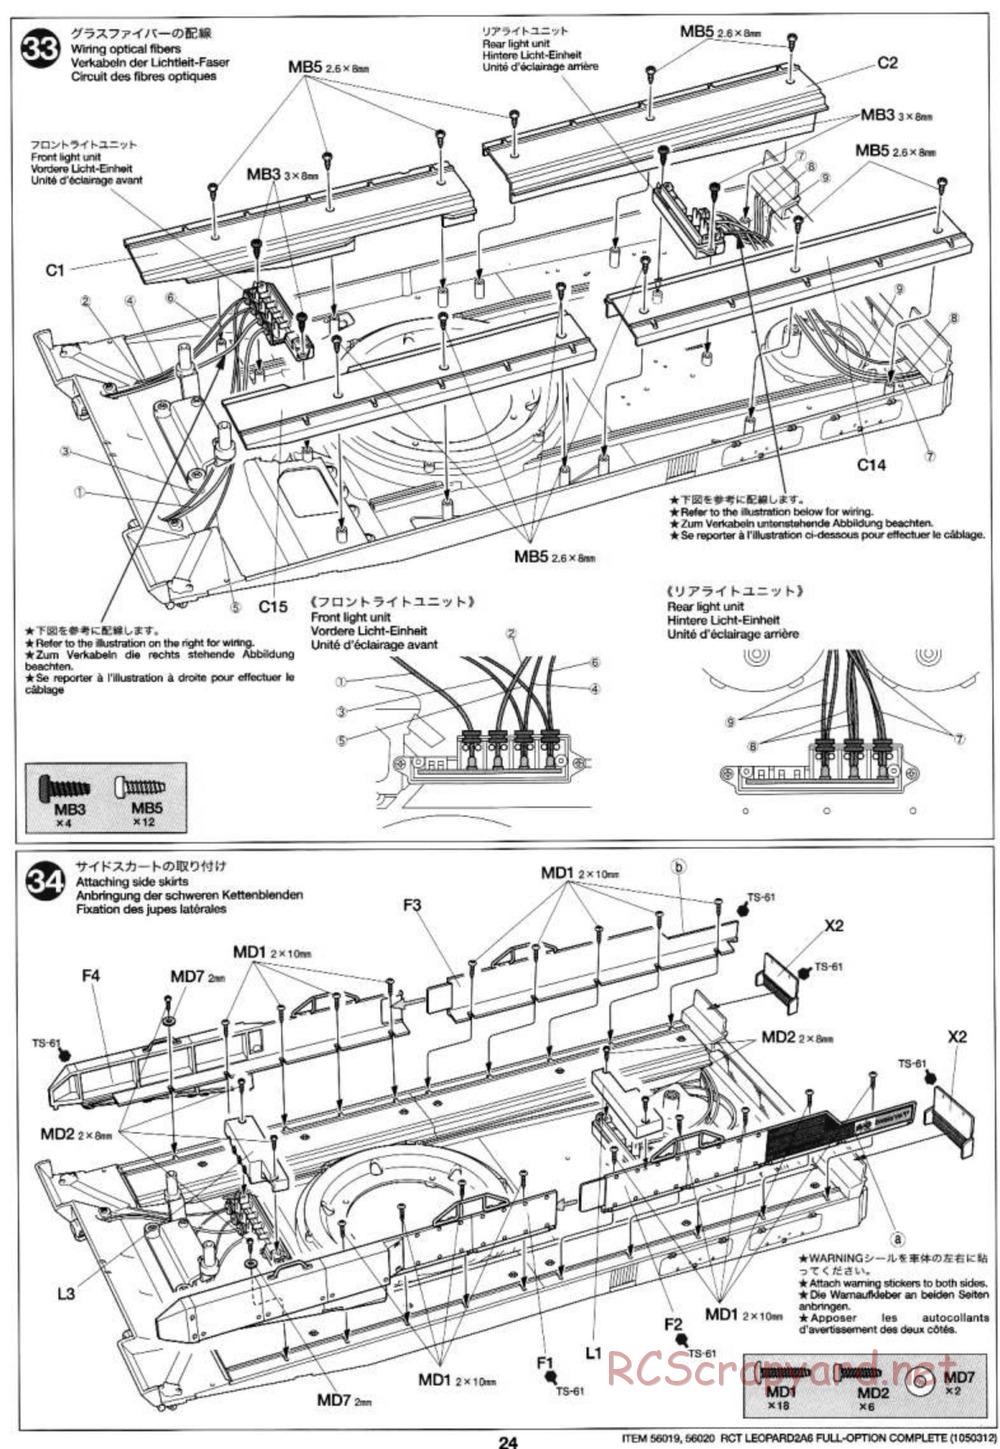 Tamiya - Leopard 2 A6 - 1/16 Scale Chassis - Manual - Page 24